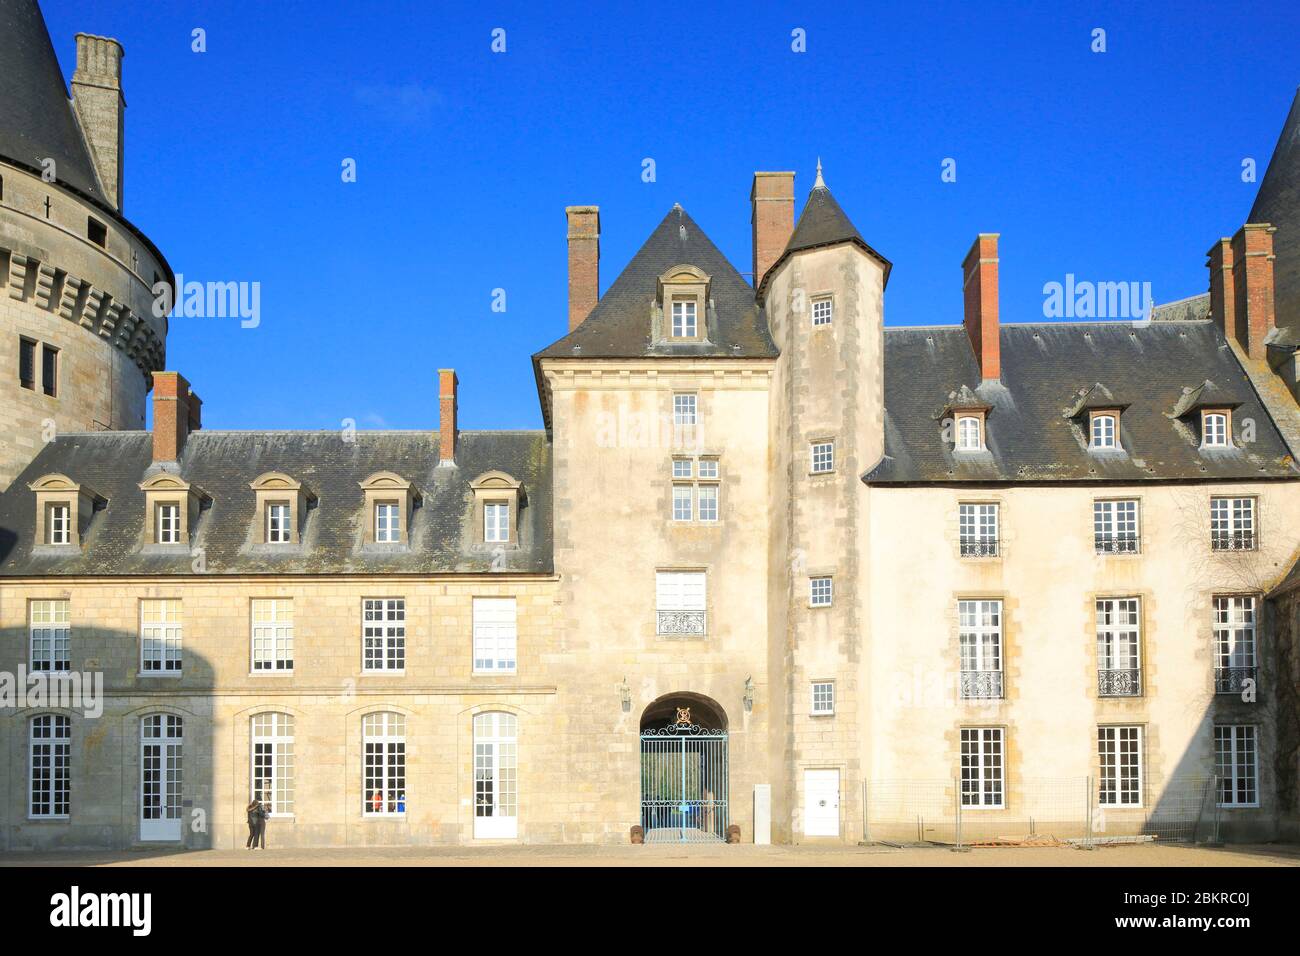 France, Loiret, Sully sur Loire (commune is located within the perimeter of the Loire Valley listed as World Heritage by UNESCO), castle (14th-18th century) of Renaissance style seen from the interior courtyard Stock Photo